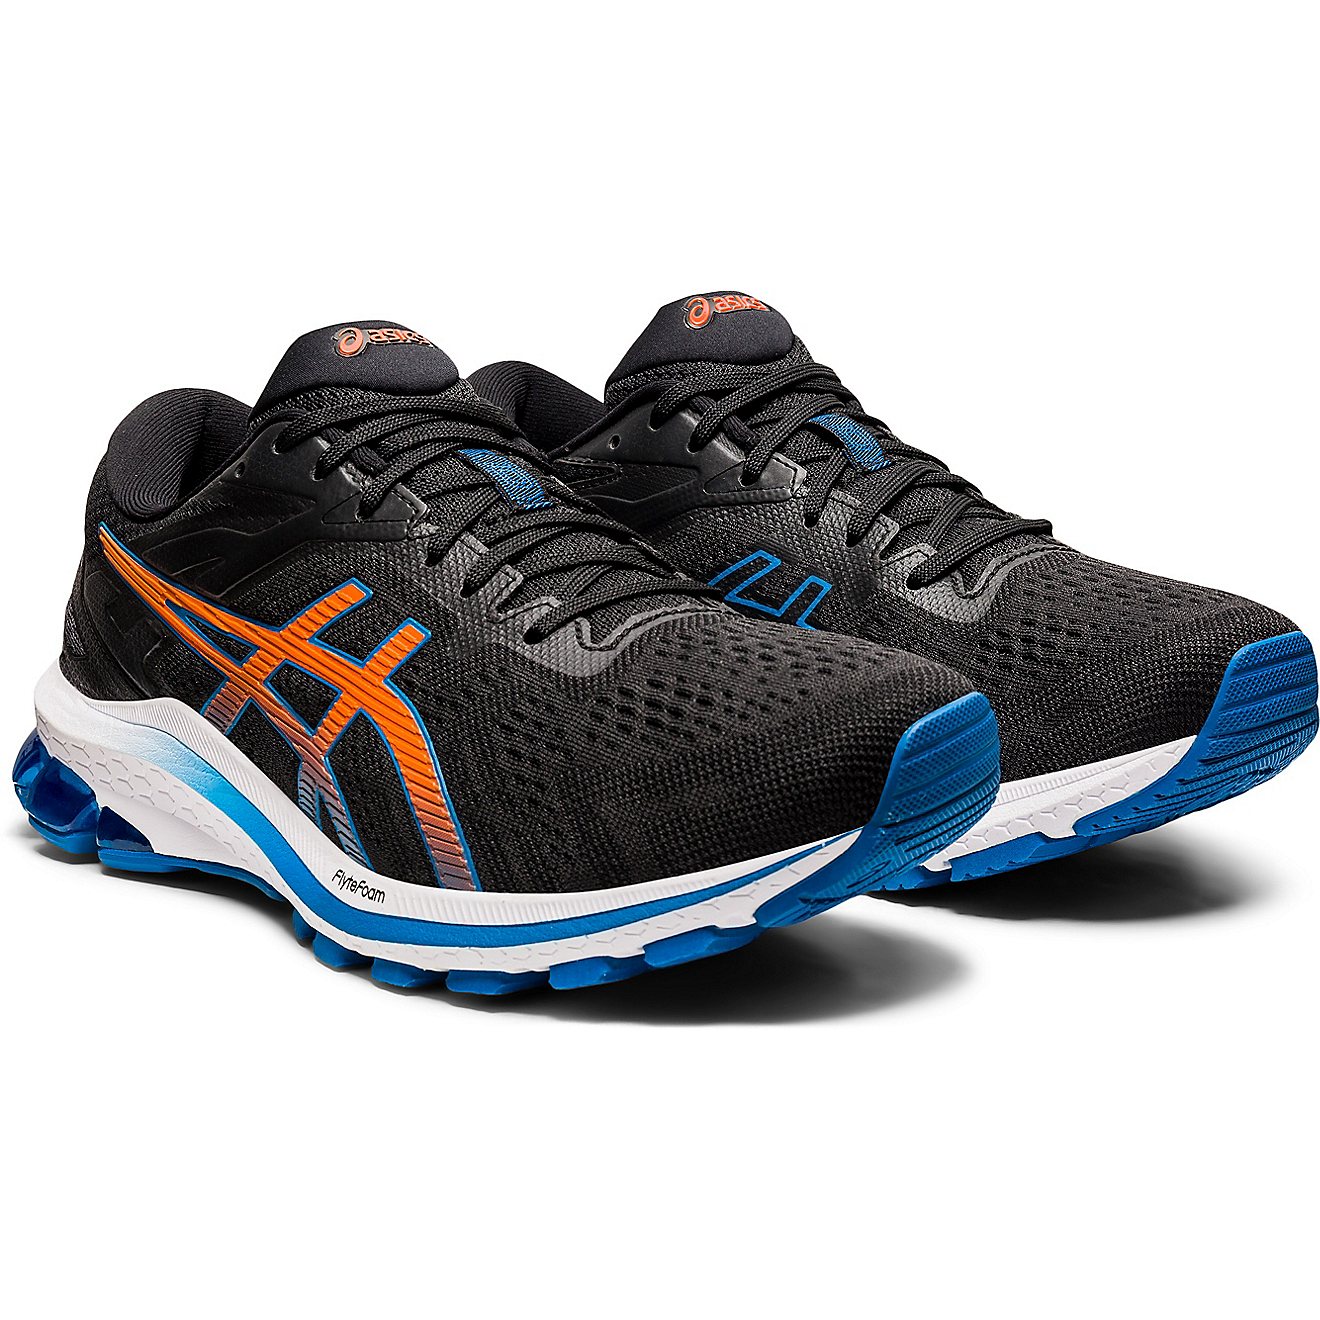 ASICS Men's GT-1000 10 Running Shoes | Free Shipping at Academy